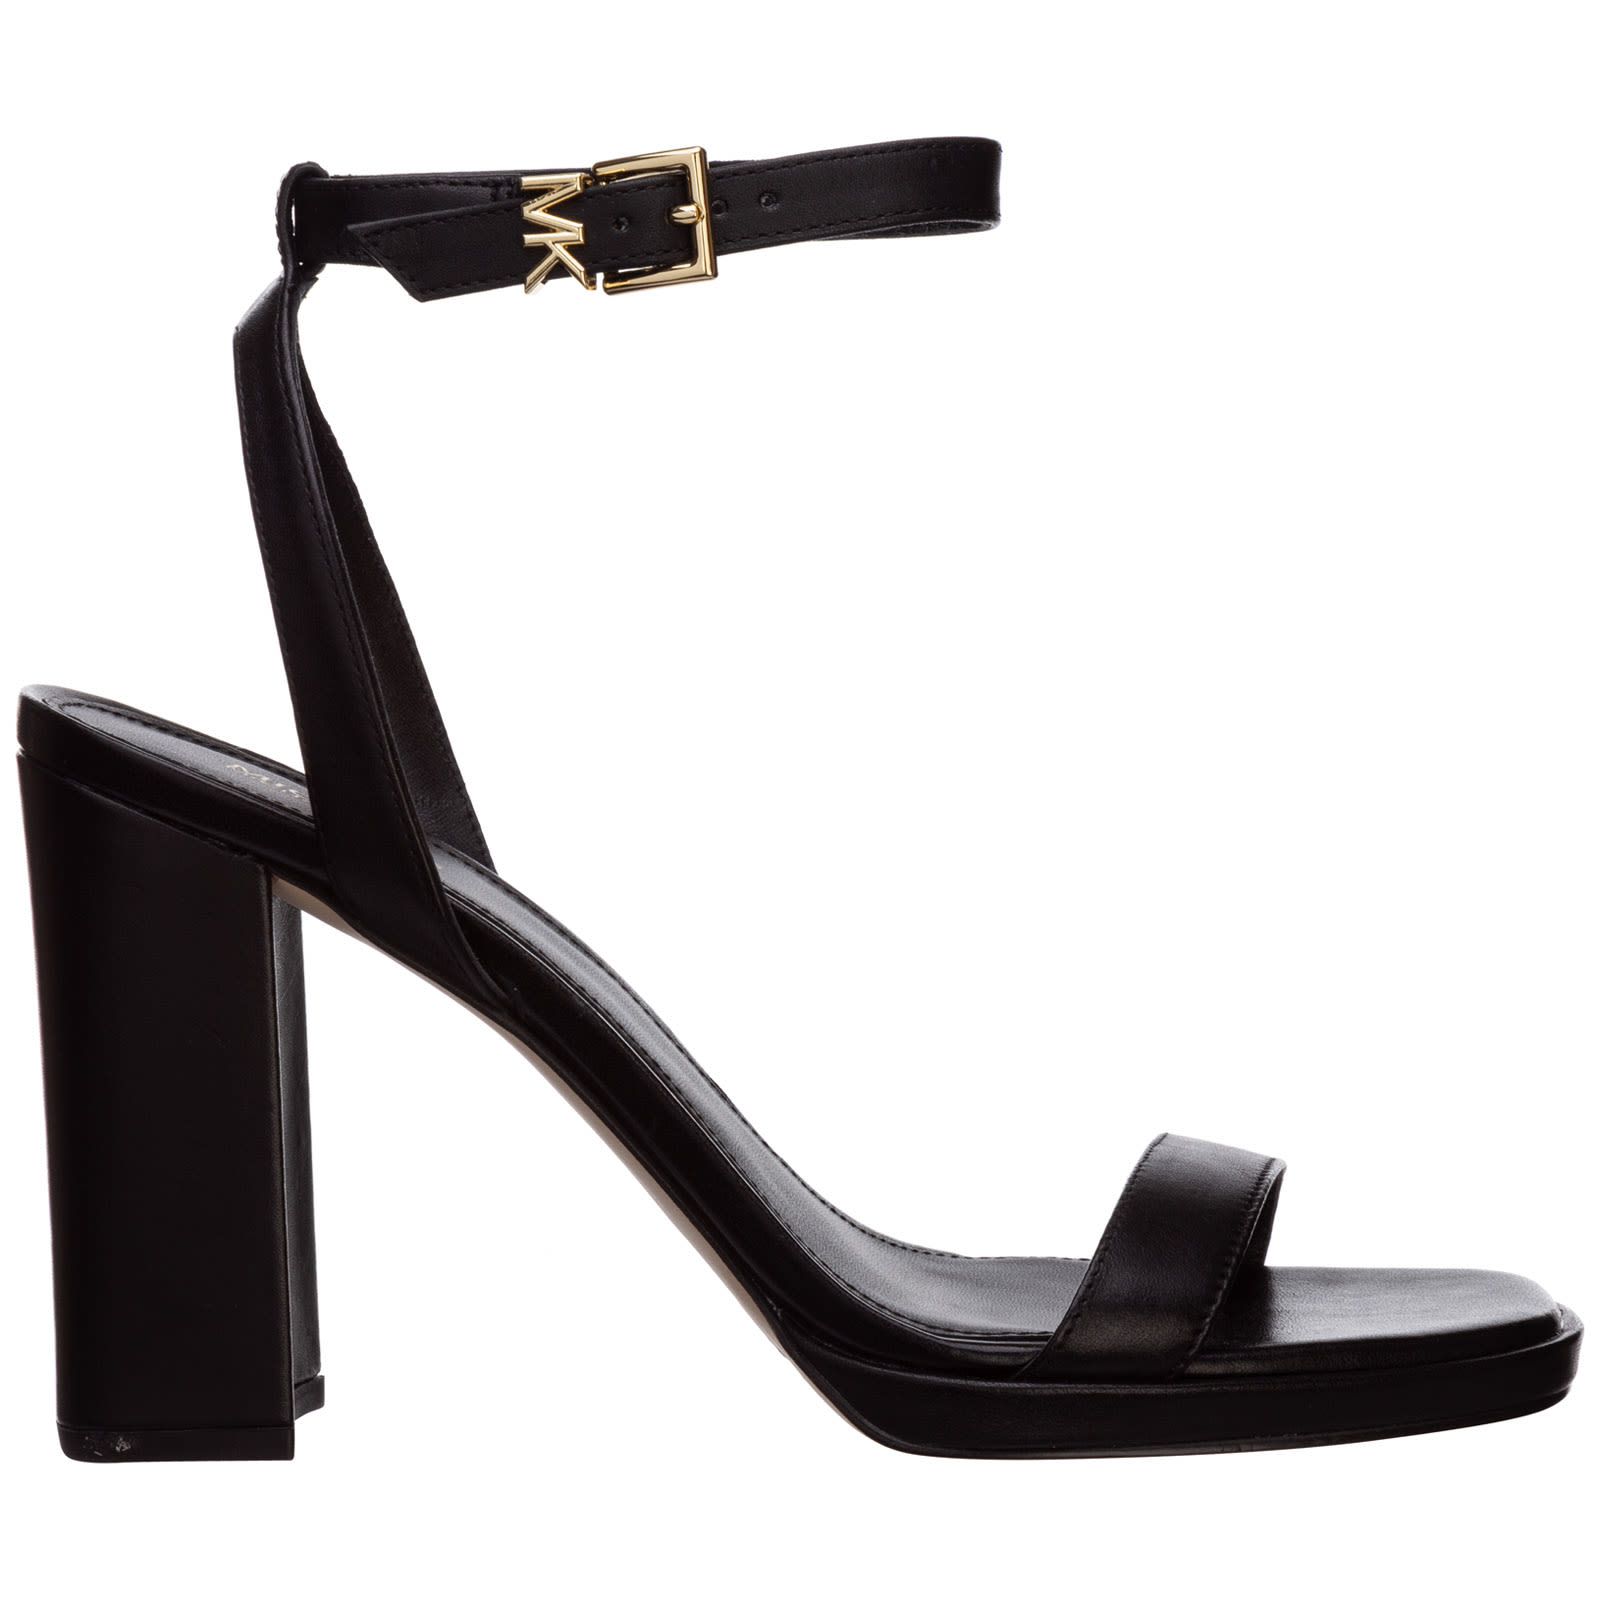 Buy Michael Kors Amelia Sandals online, shop Michael Kors shoes with free shipping